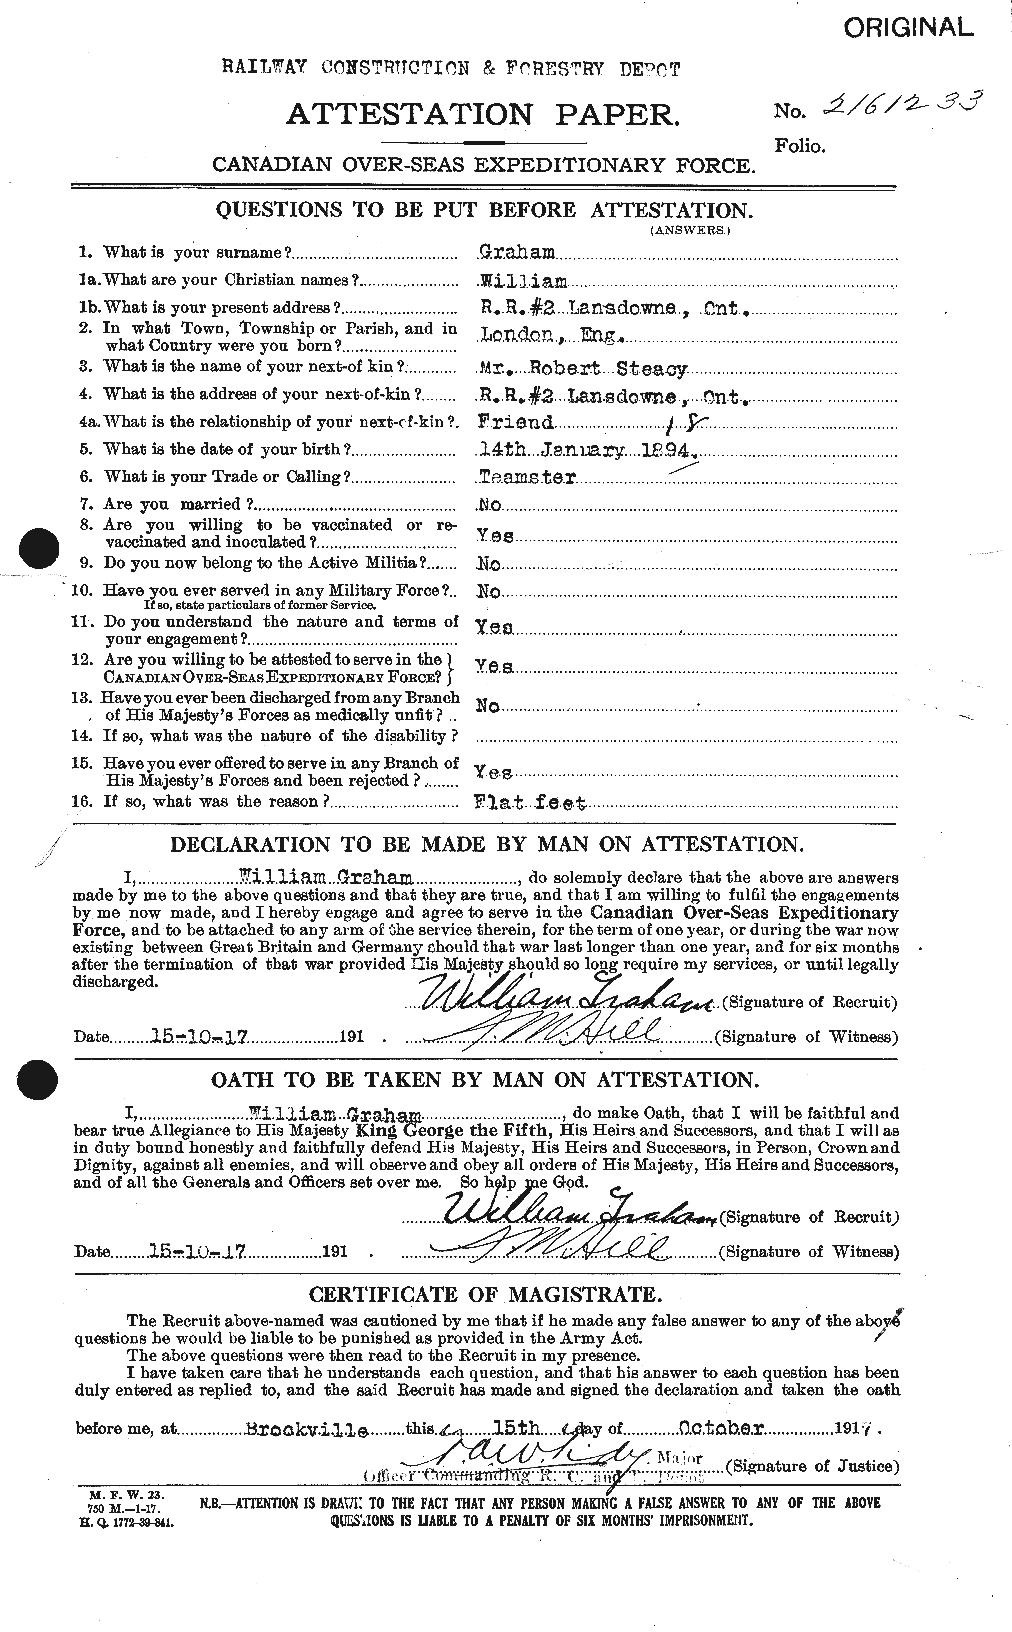 Personnel Records of the First World War - CEF 362709a